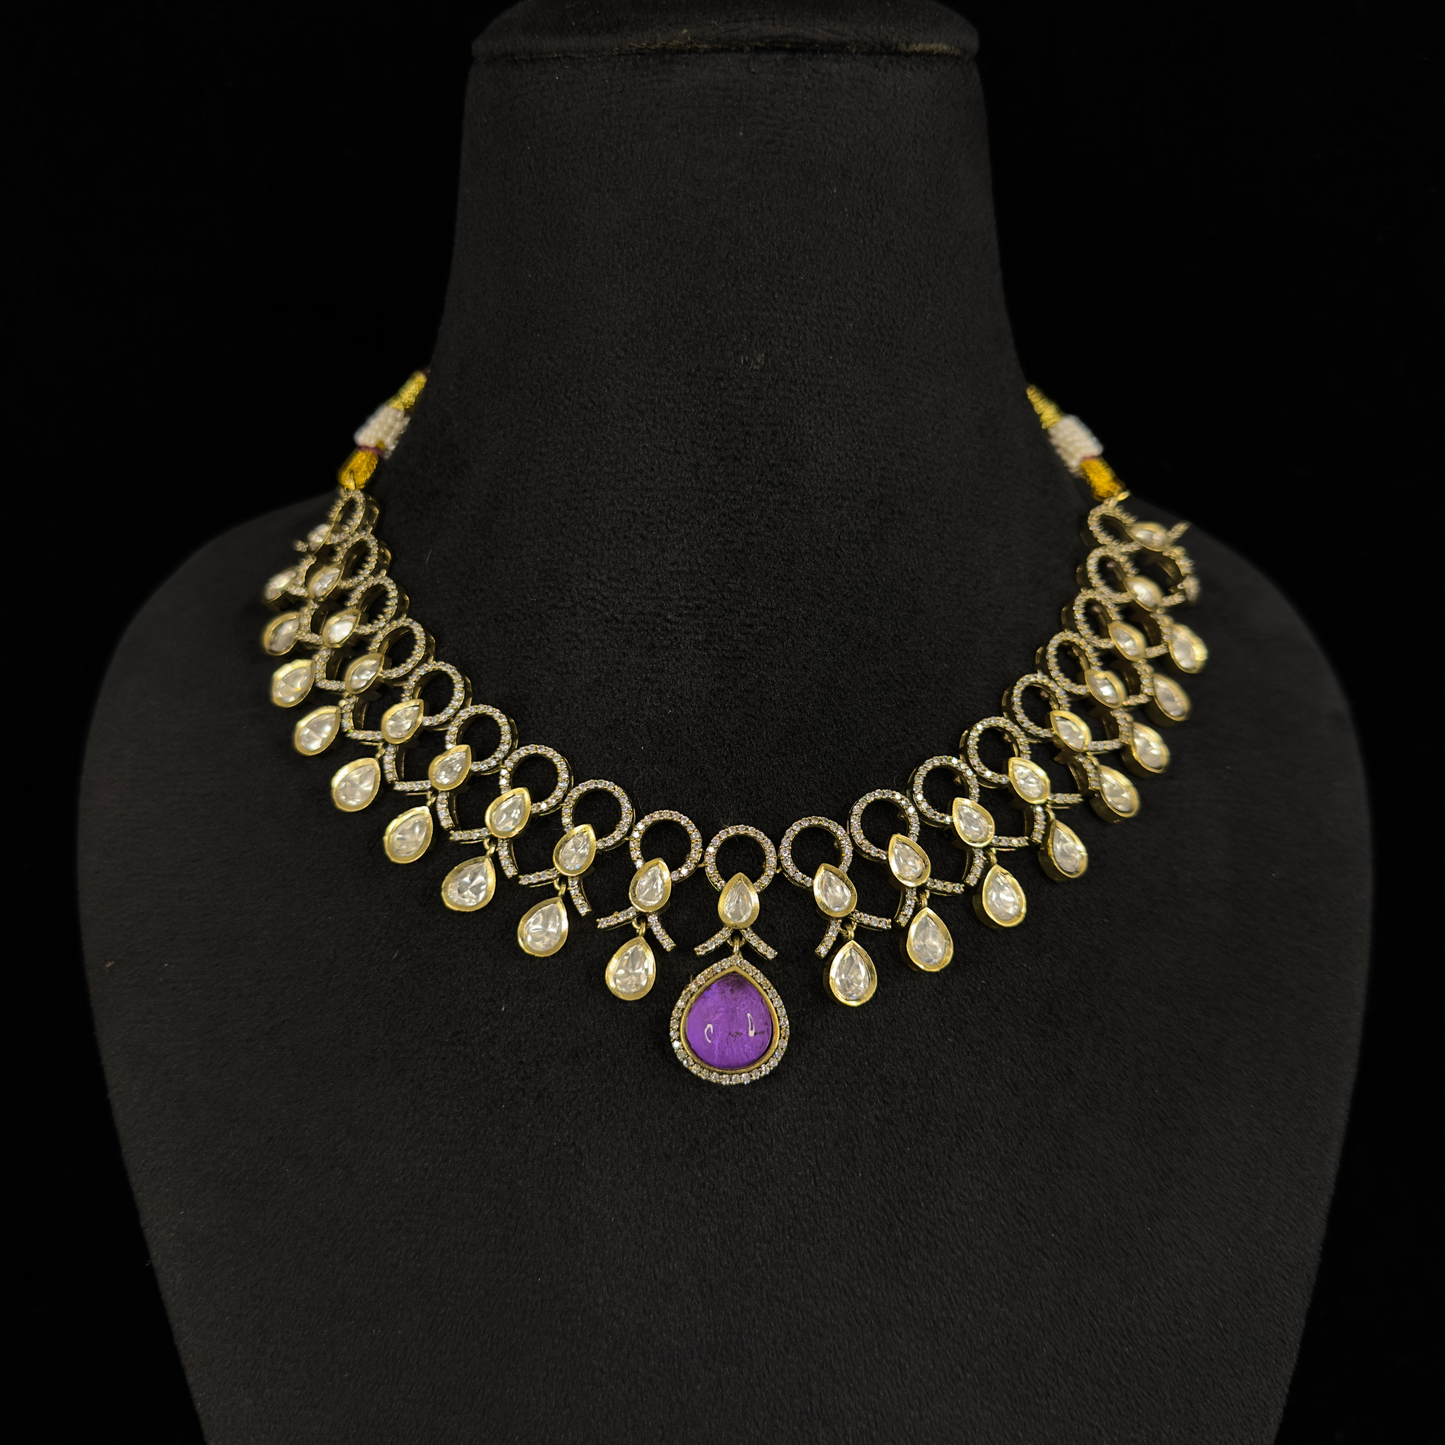 Voguish Victorian Polki Necklace with earrings